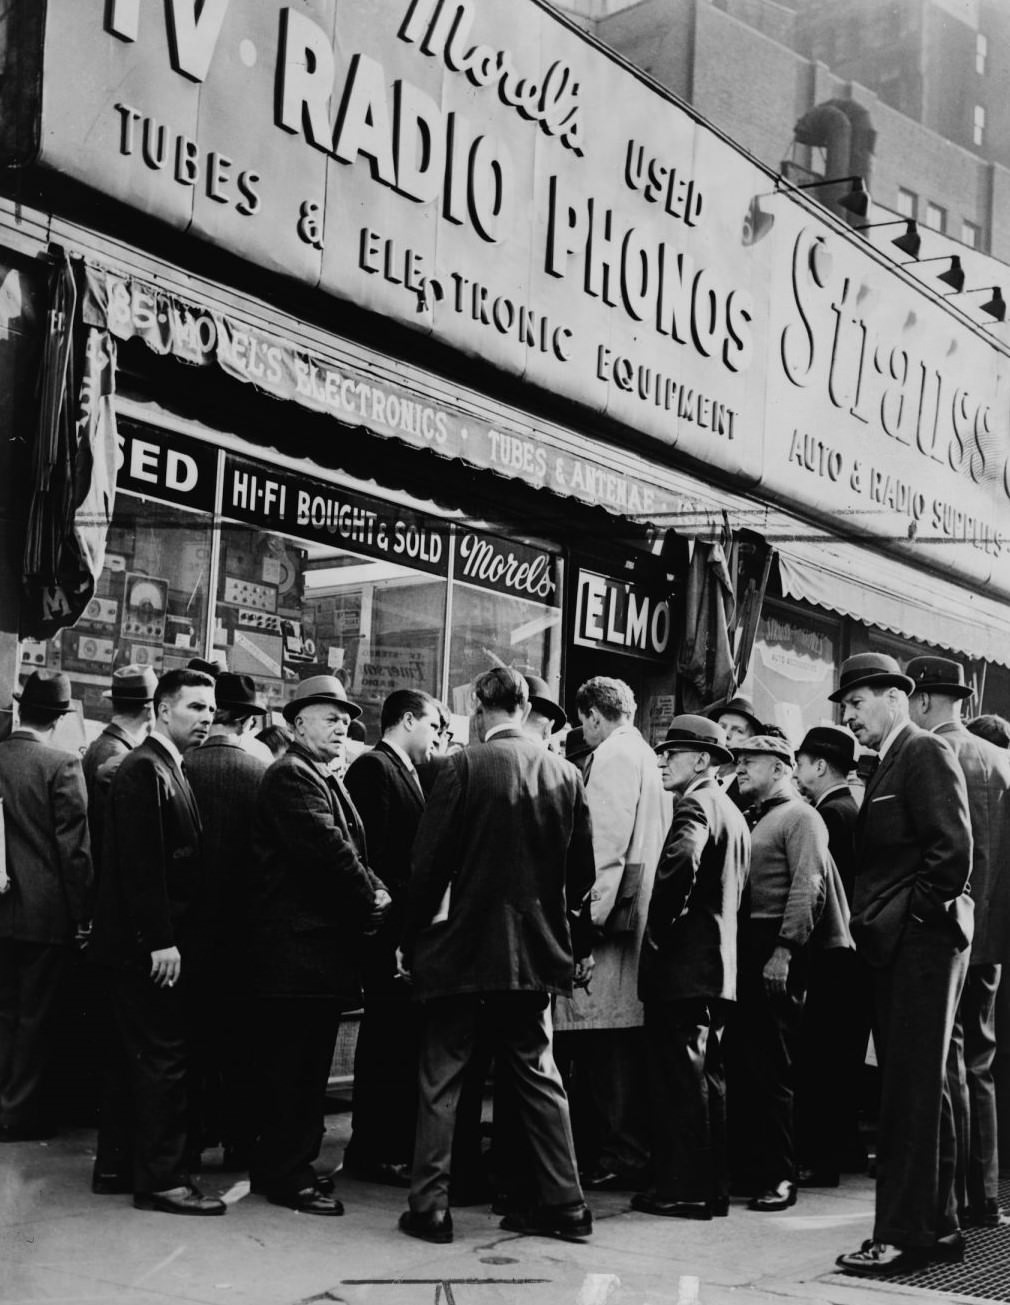 Crowd Listens Outside Radio Shop At Greenwich And Dey Sts. For News On President Kennedy, New York City, 1963.